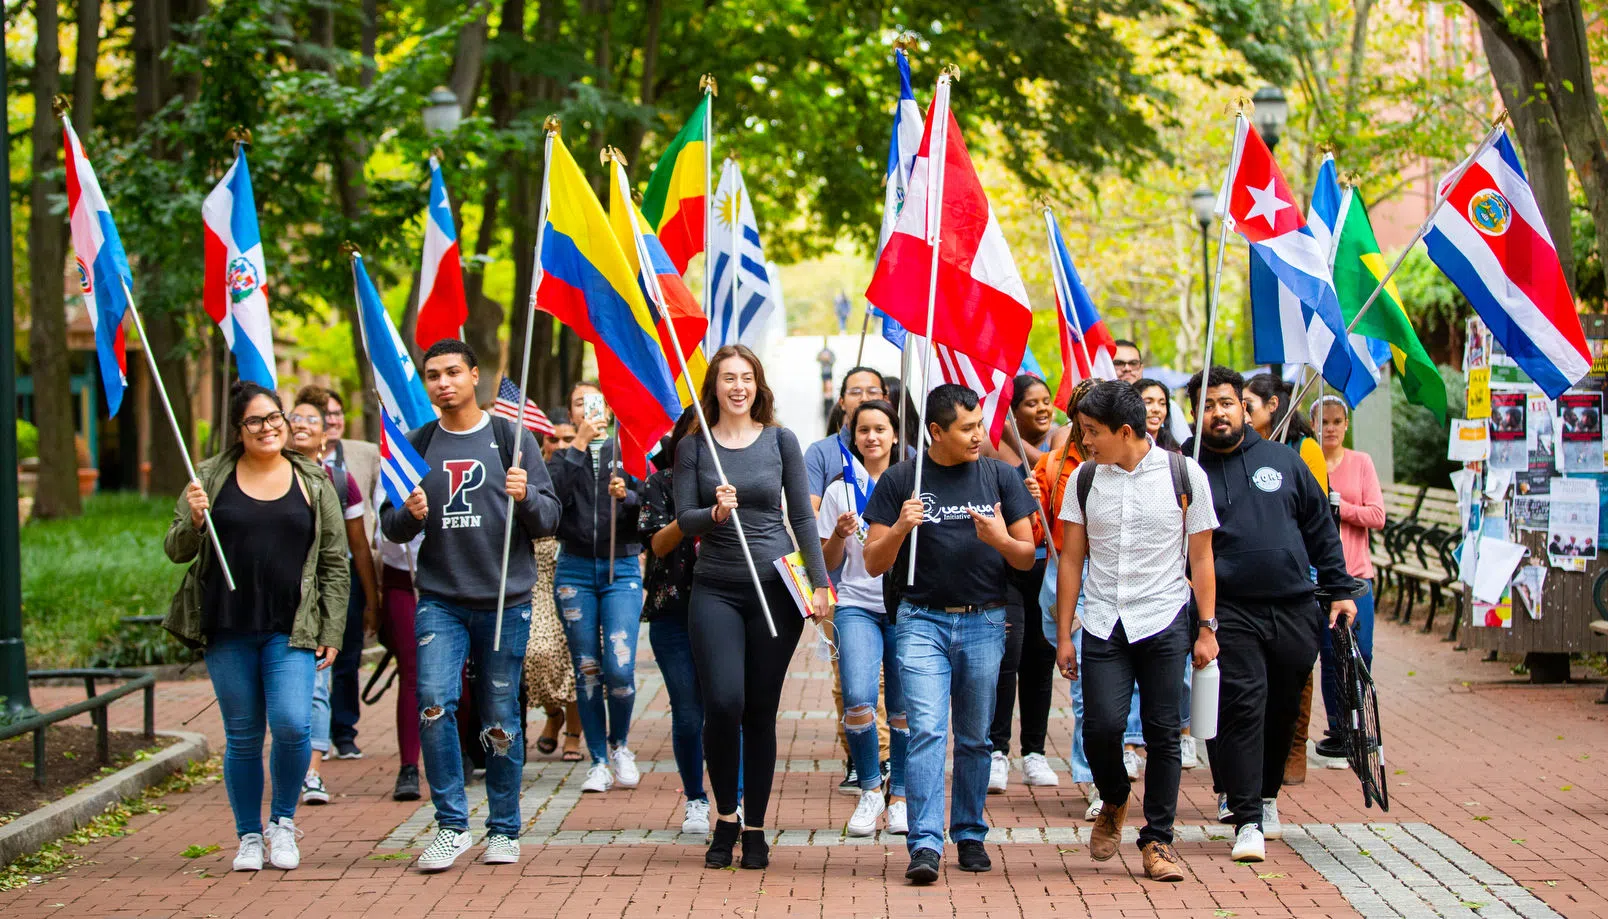 Group of 20 Penn students and community members walking down Locust Walk holding flags representing various Latin American countries.